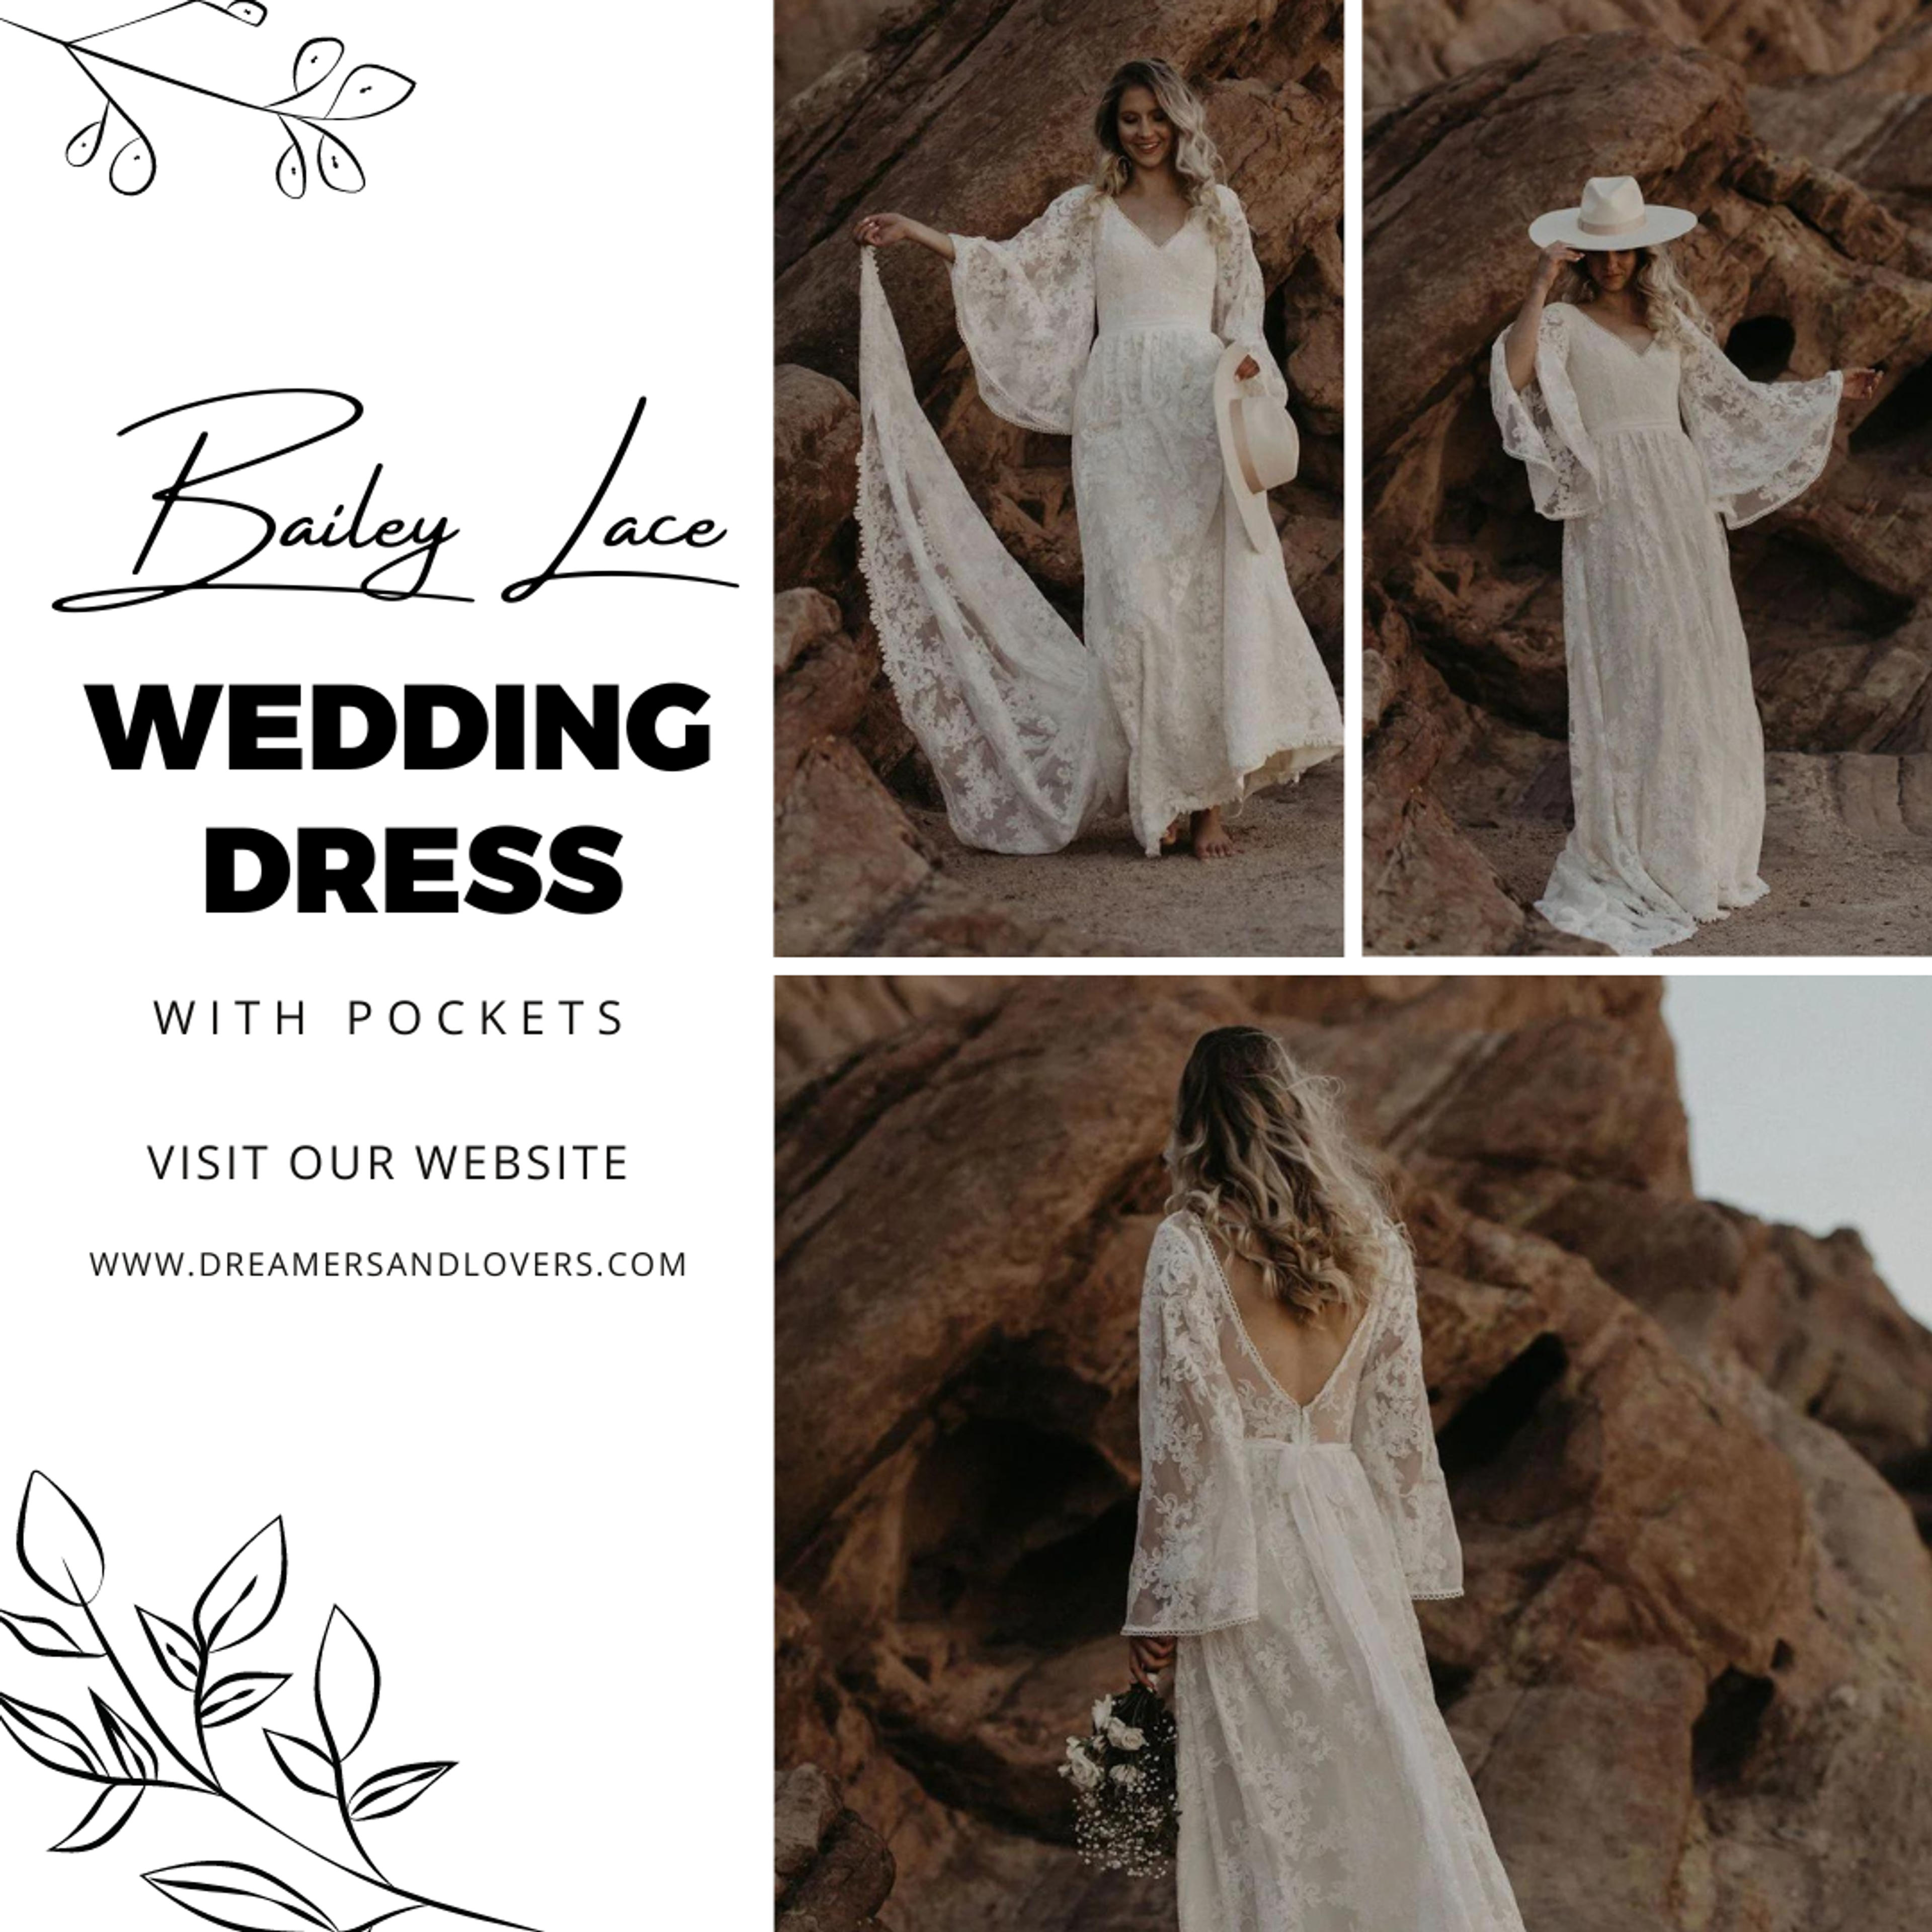 Bailey Lace Wedding Dress with Pockets | Dreamers and Lovers